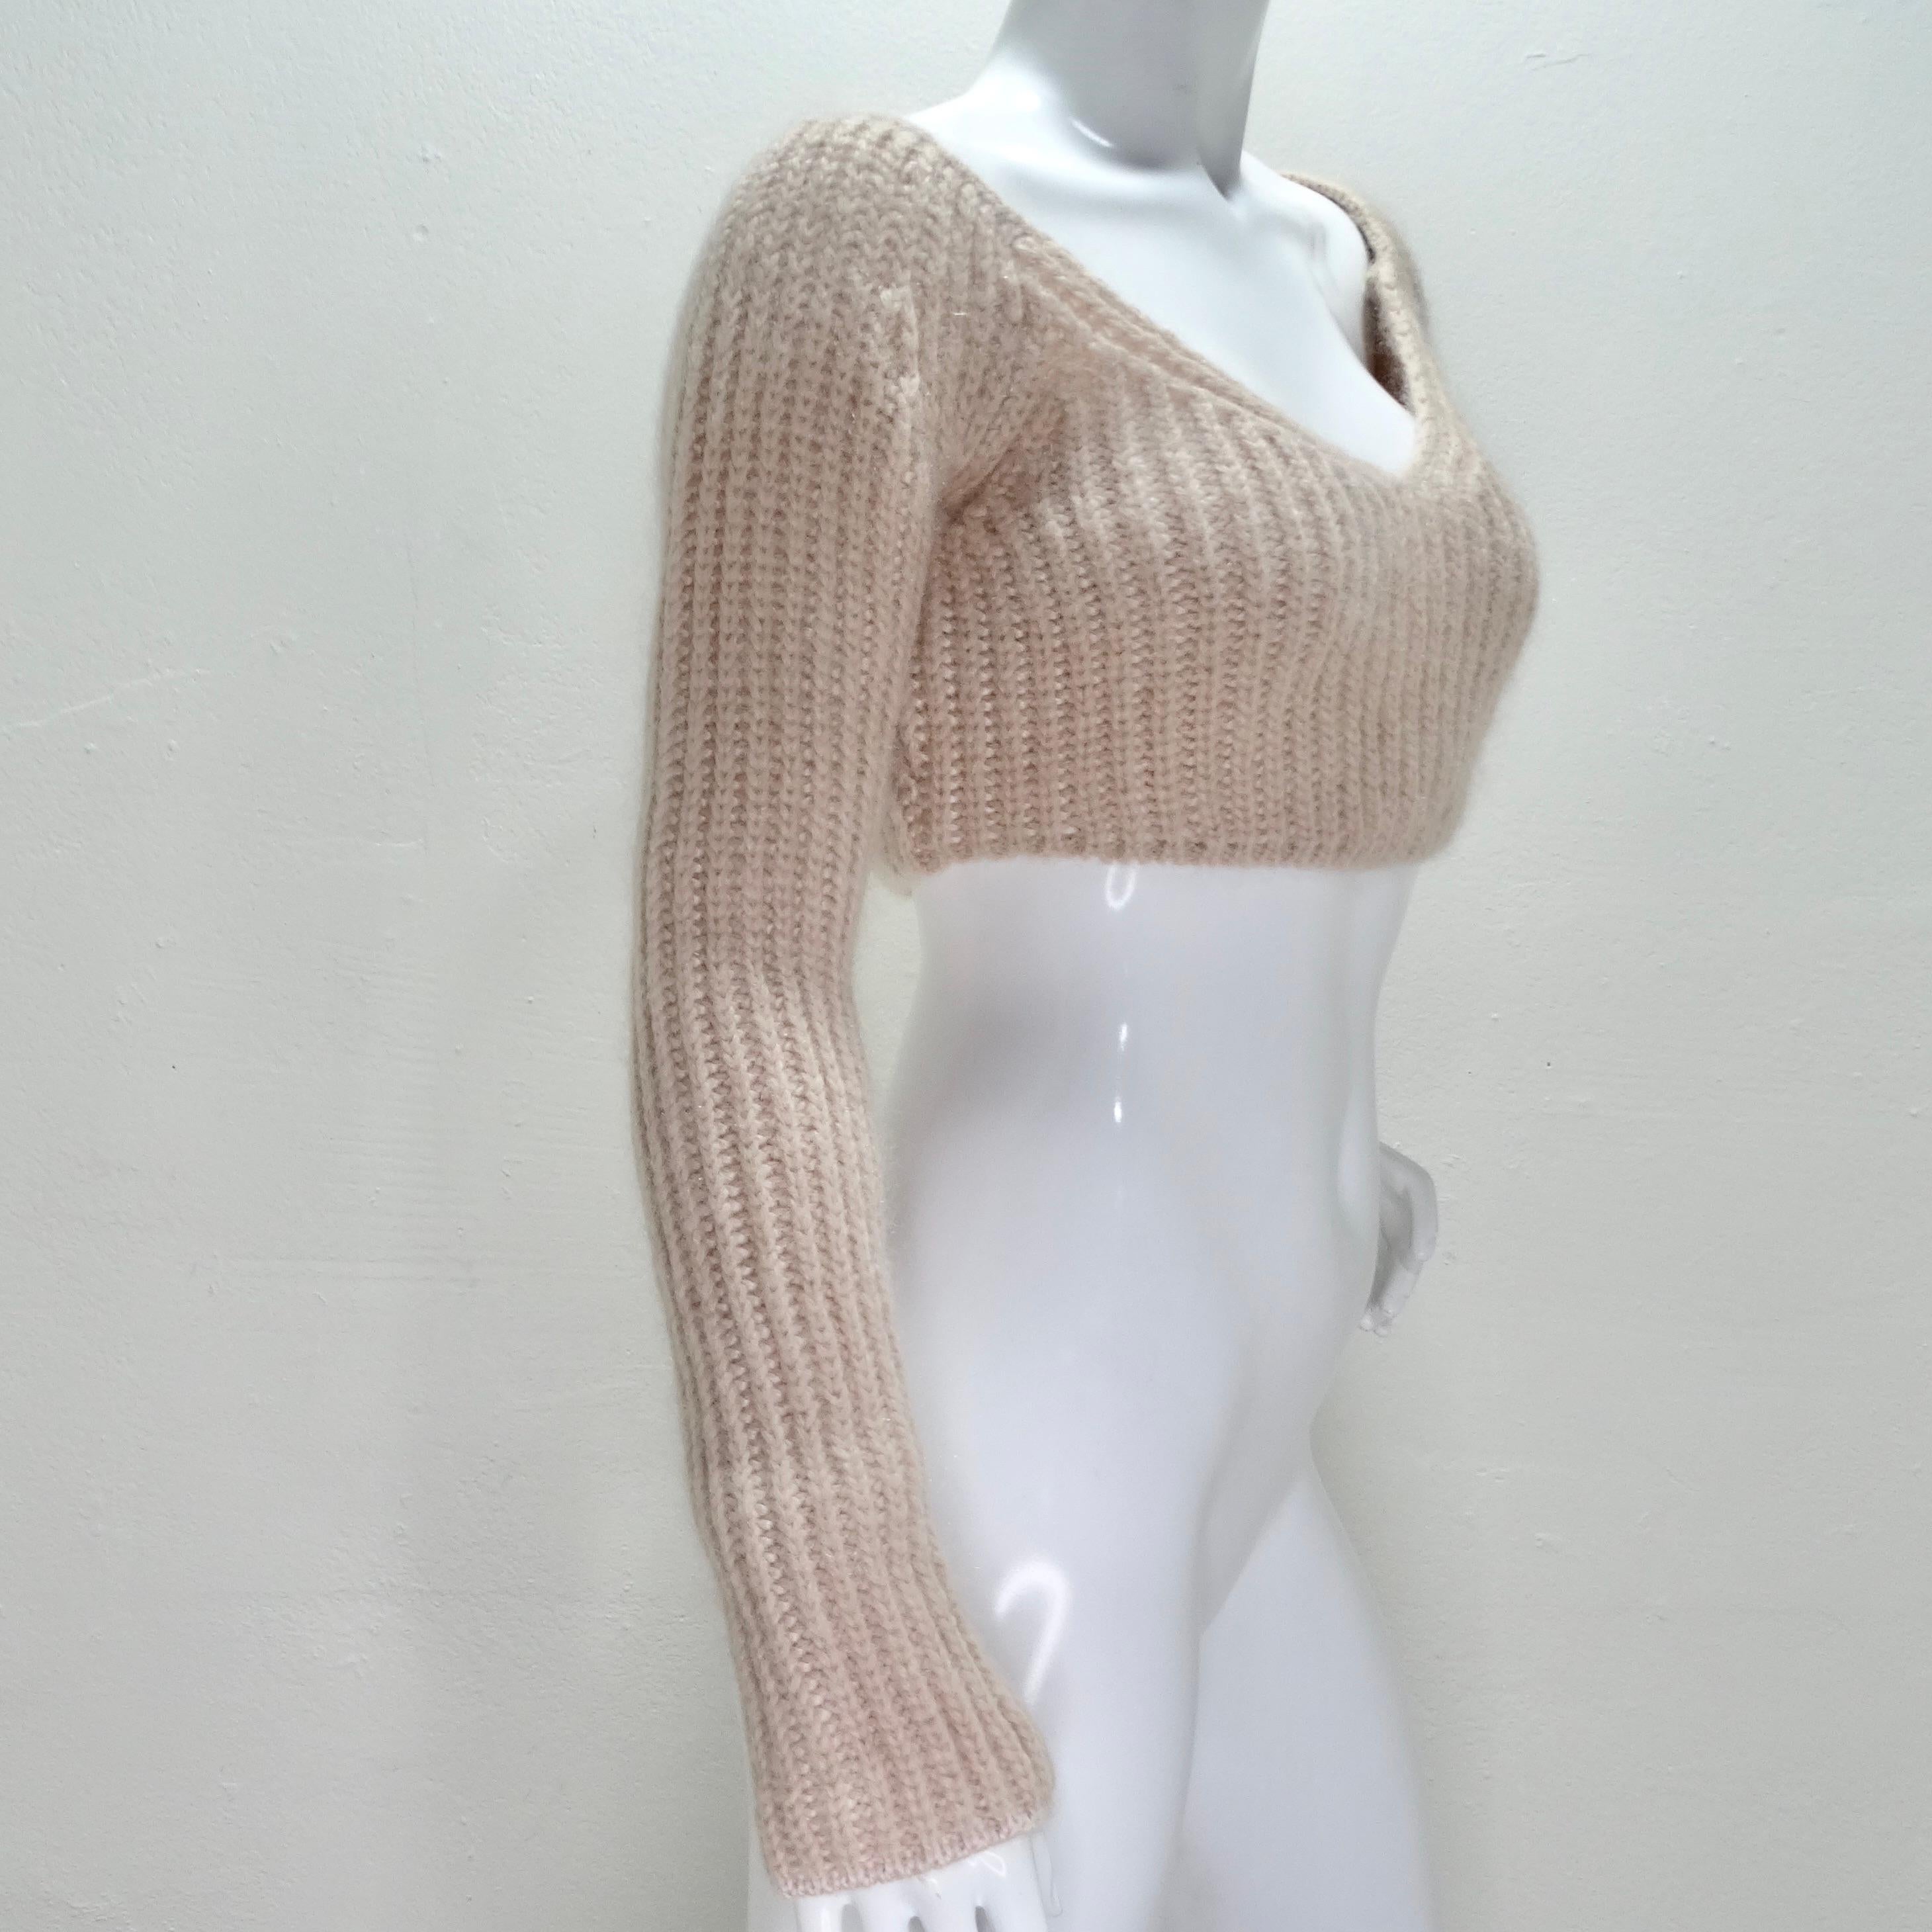 Fendi Blush Pink Cashmere Cropped Sweater In Excellent Condition For Sale In Scottsdale, AZ